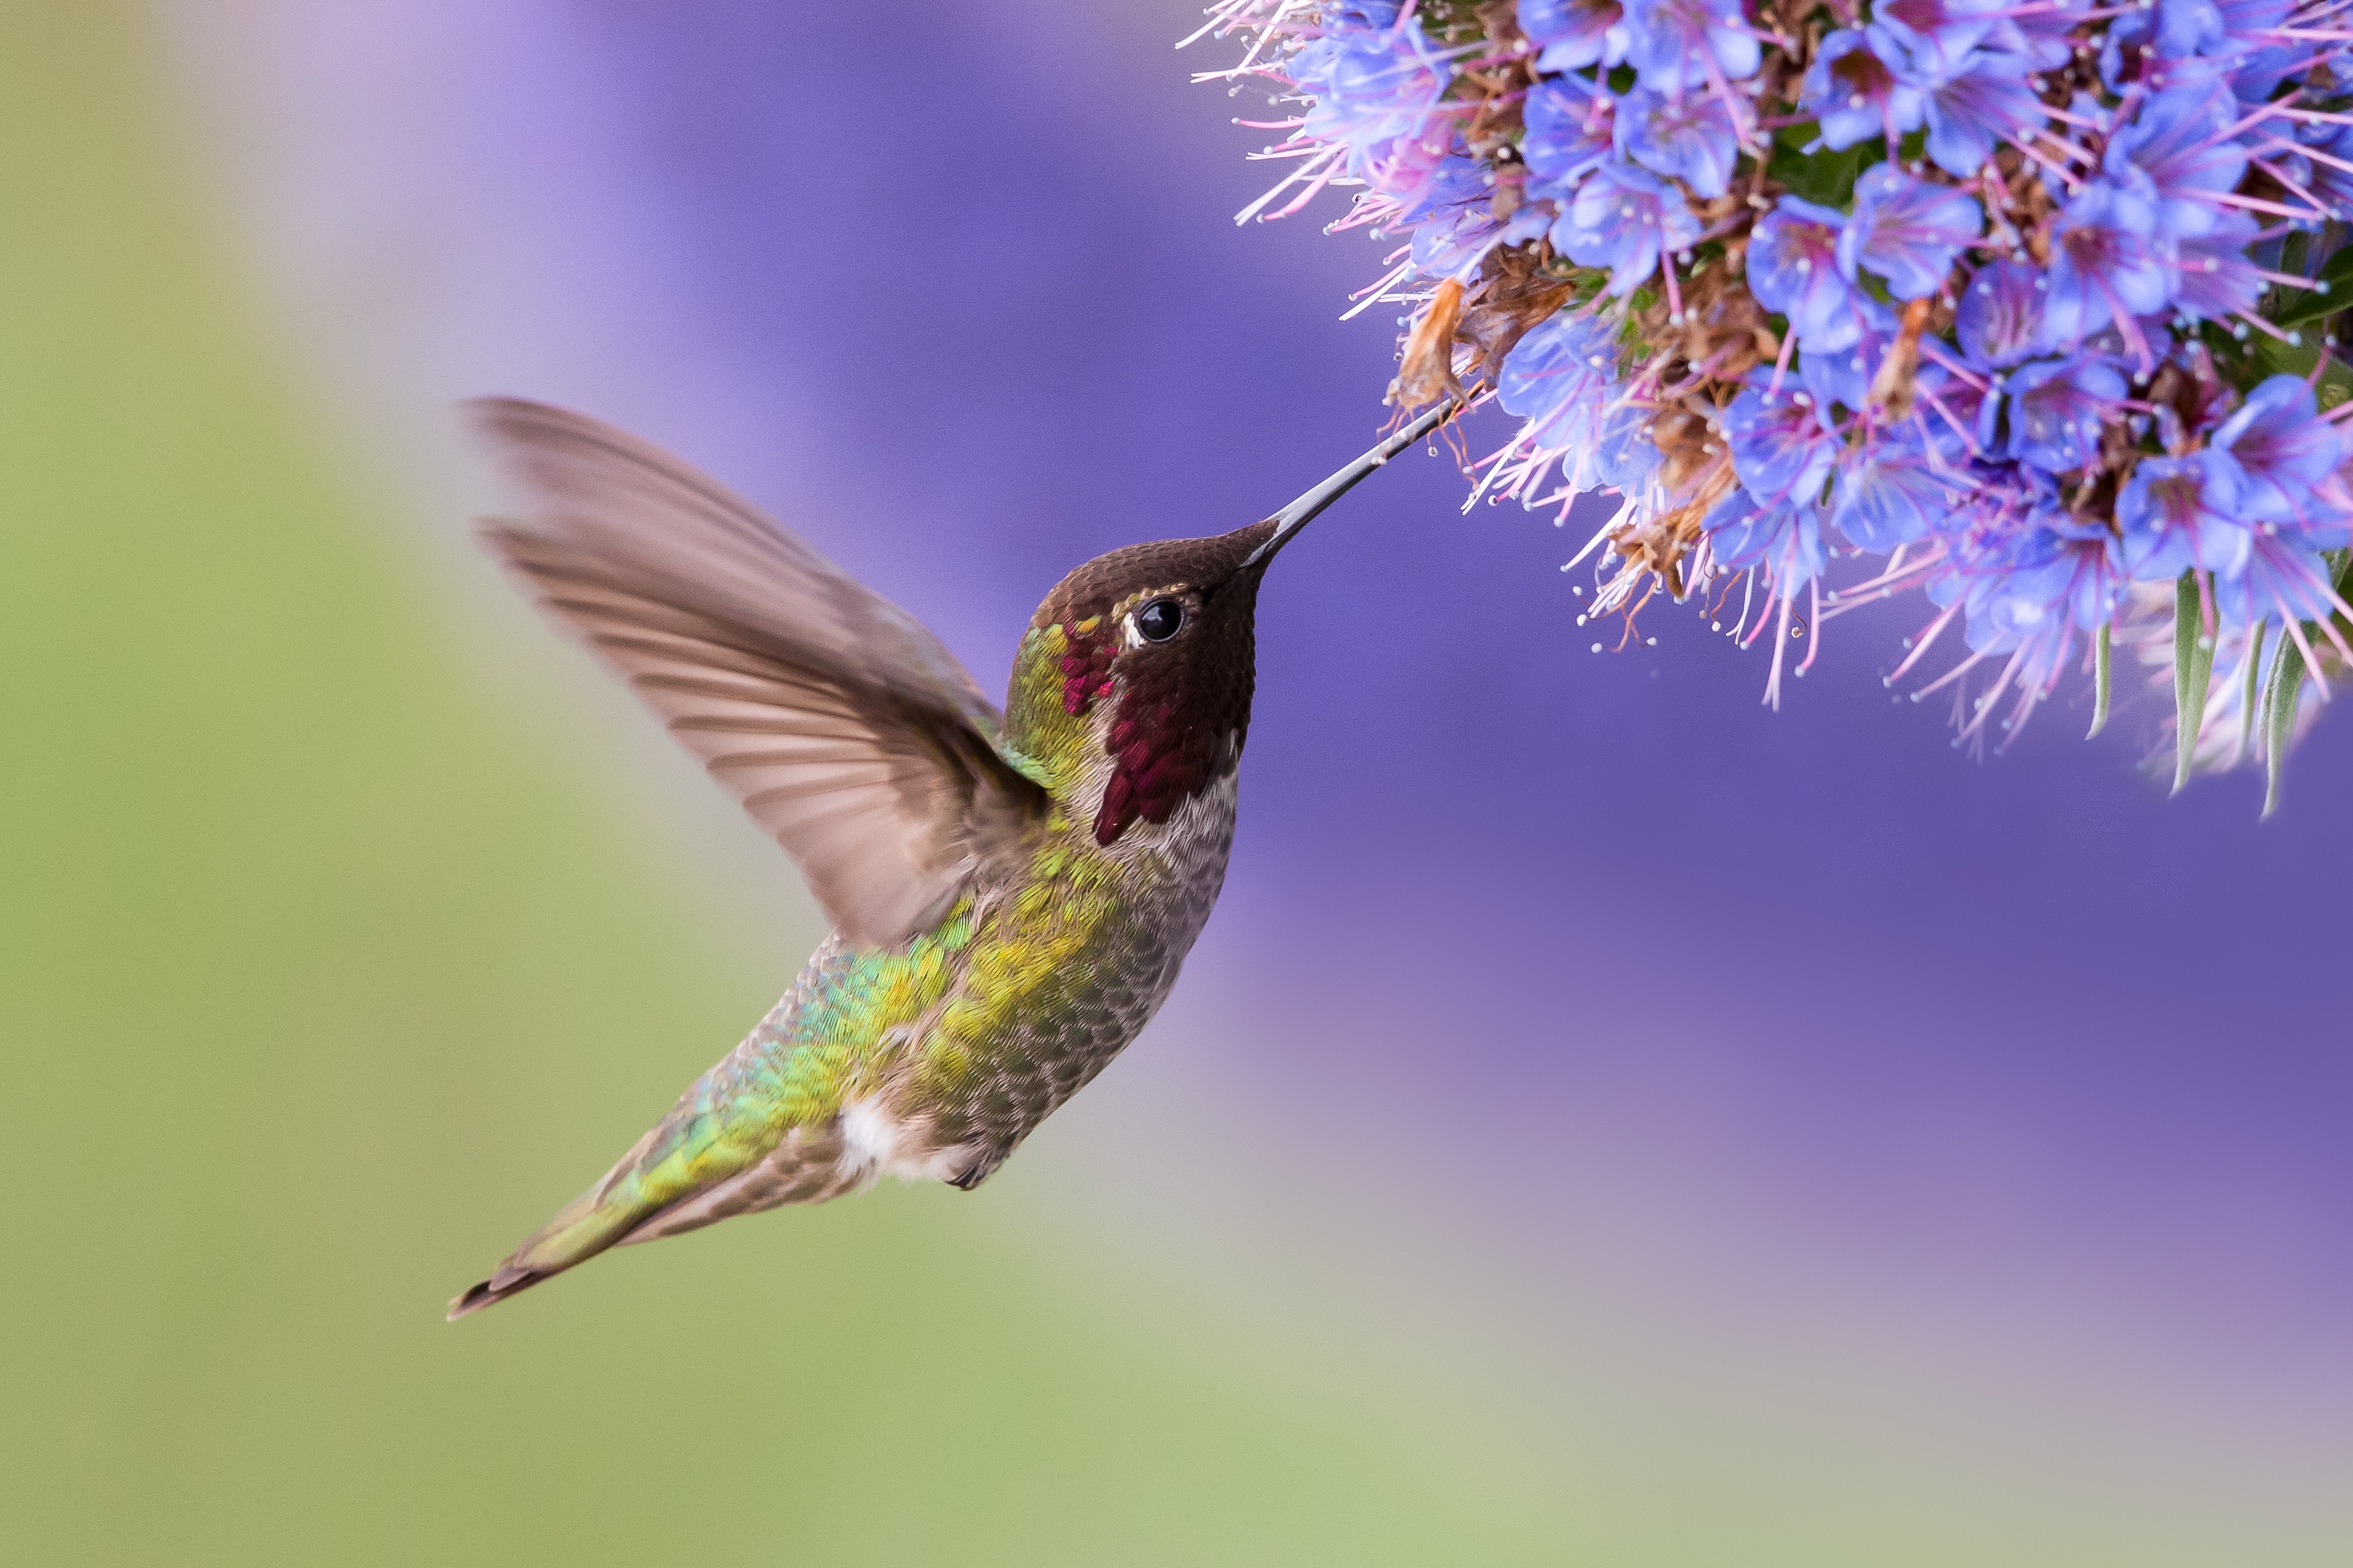 Learn how to attract hummingbirds to your outdoor space.